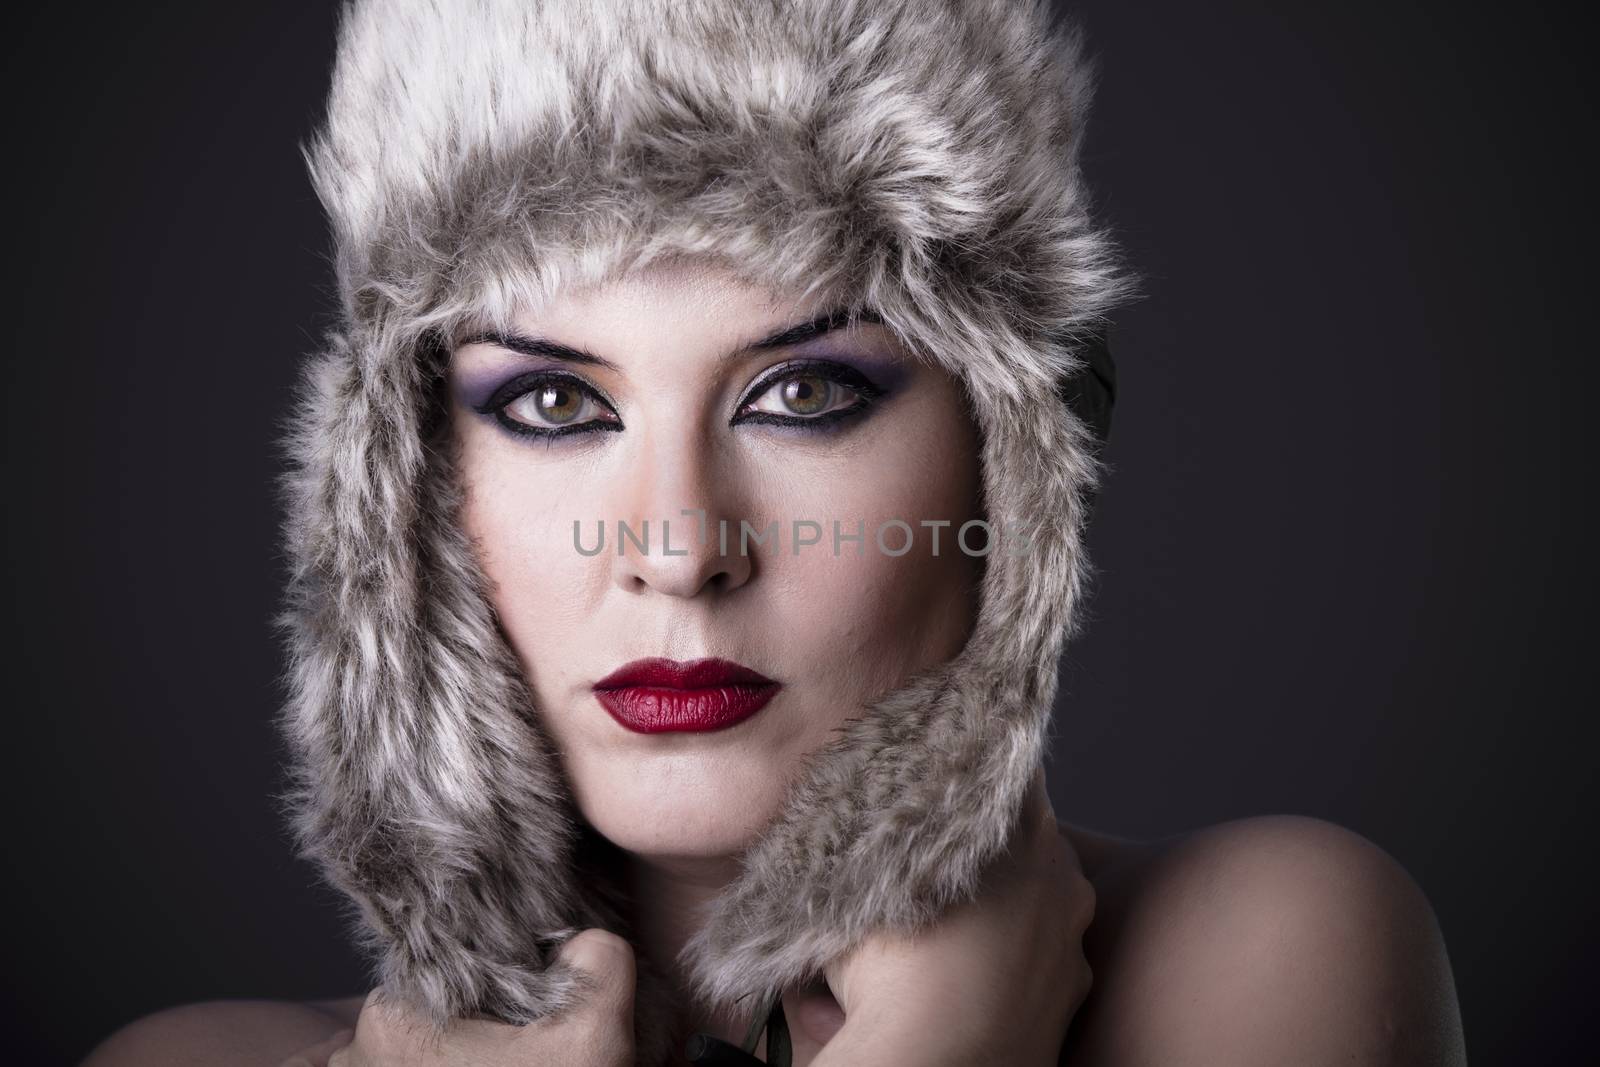 Russian Girl with hat on a dark background by FernandoCortes